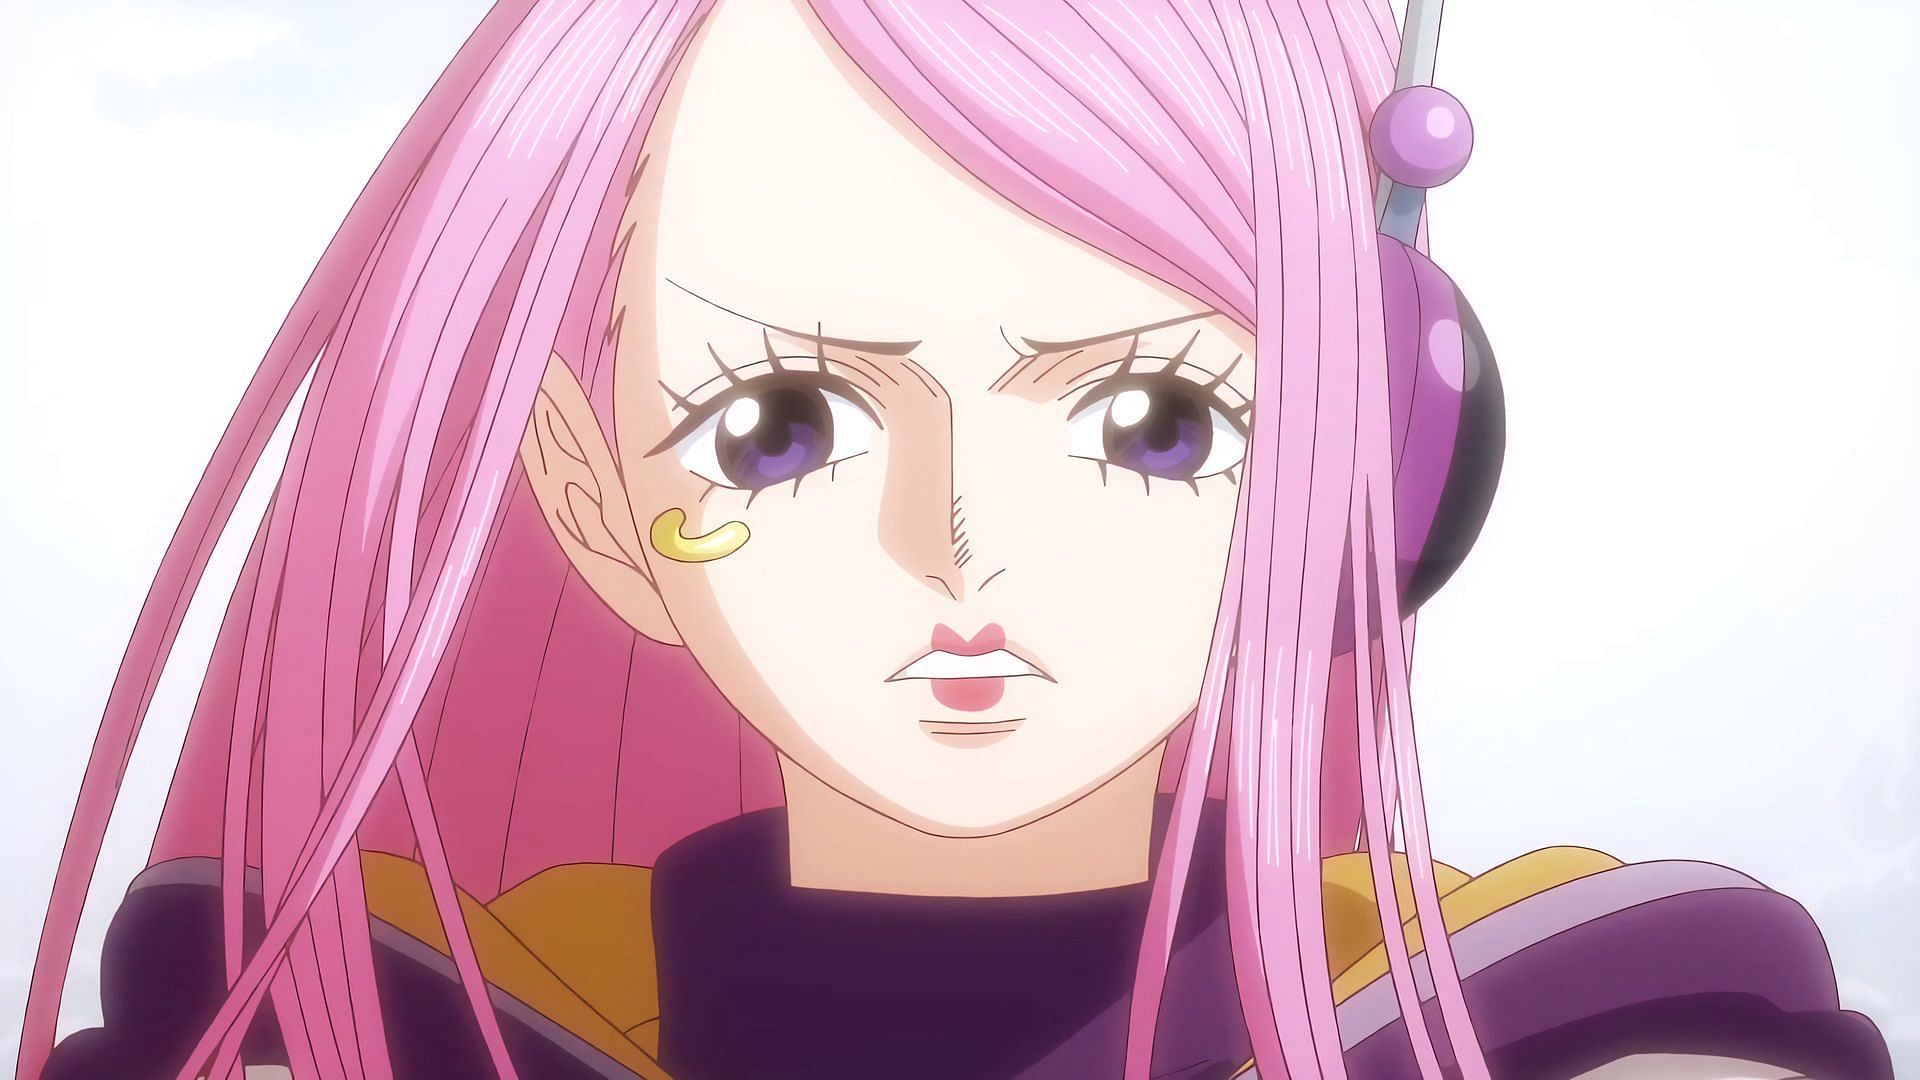 Jewelry Bonney as seen during the Egghead Arc (Image via Toei Animation)